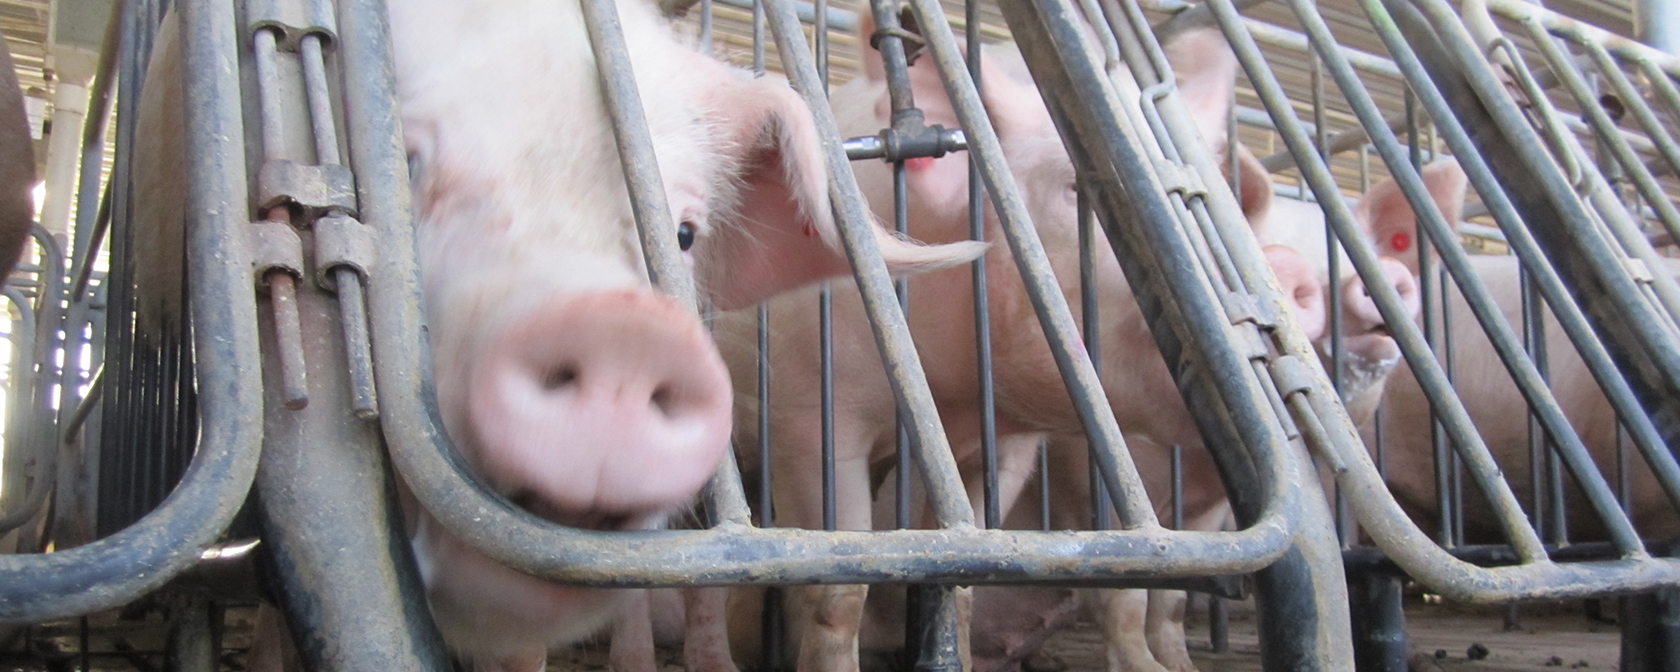 As a New Year dawns, so does a new era in the treatment of animals raised for food